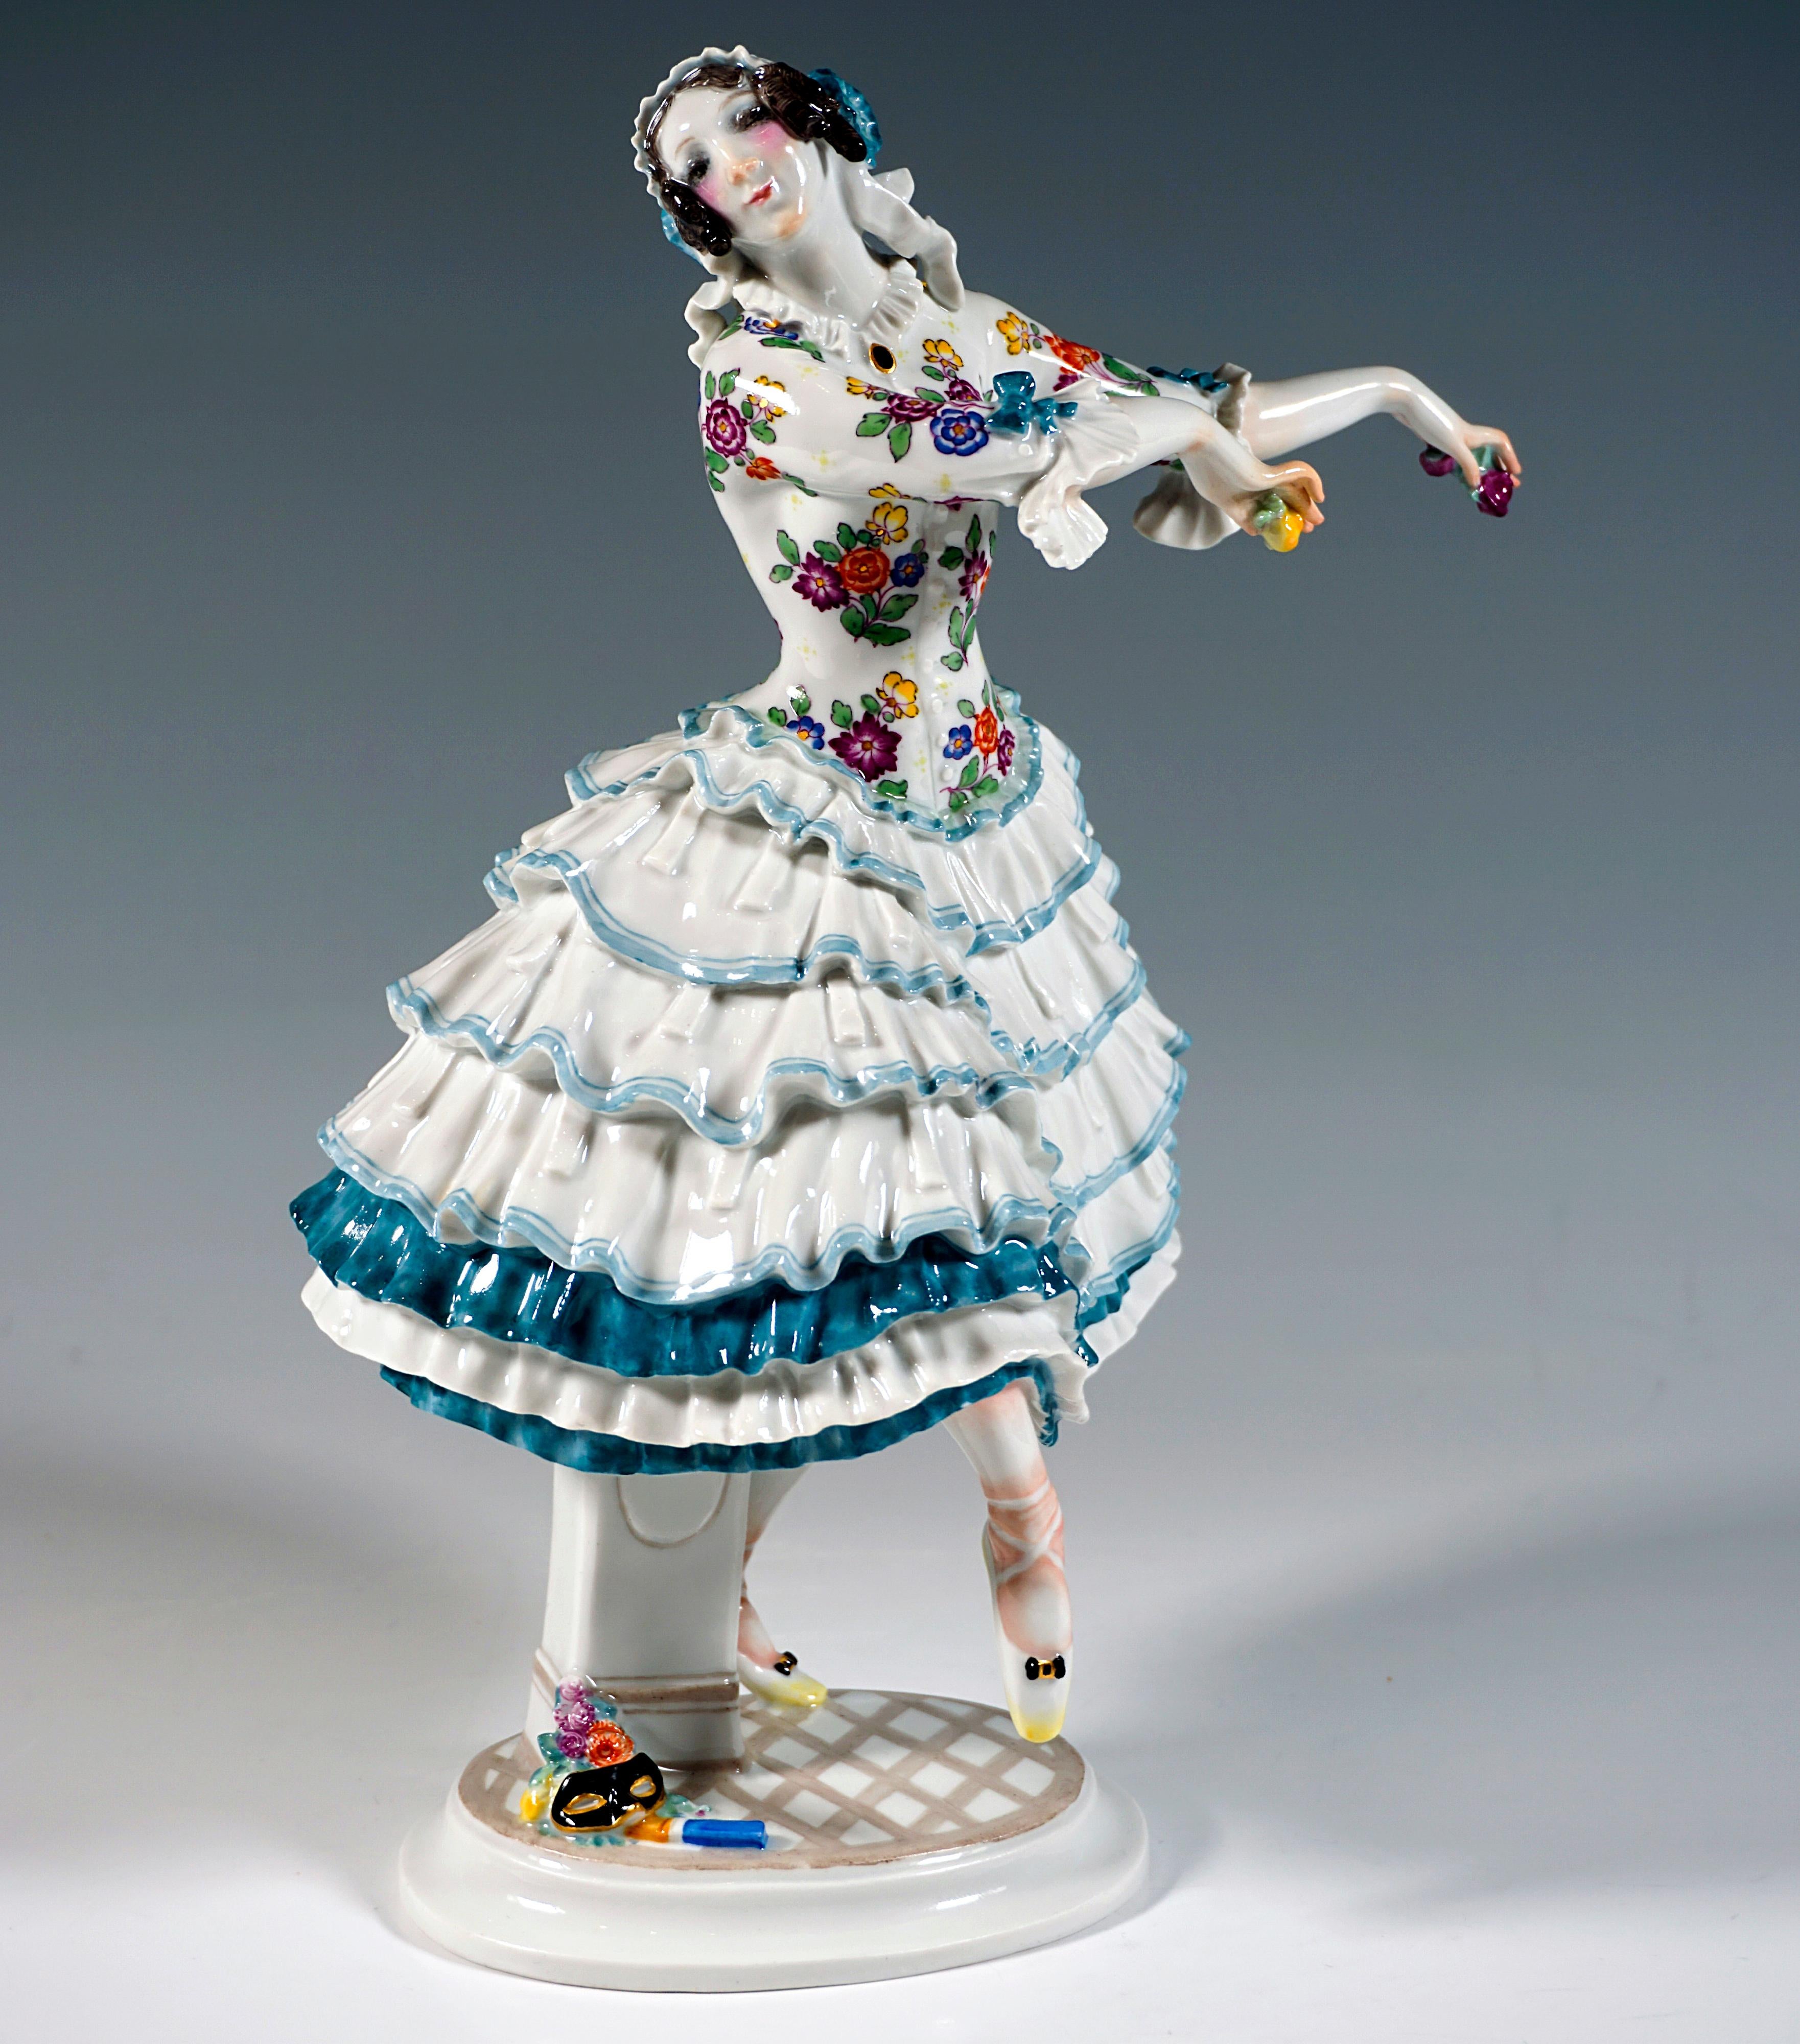 Finest Meissen Porcelain Figurine:
Dancer balancing on the ball of her left foot, lifting her right leg slightly forward with her foot extended downward, leaning her head to the right and leading both arms elegantly to her left side, flowers in her